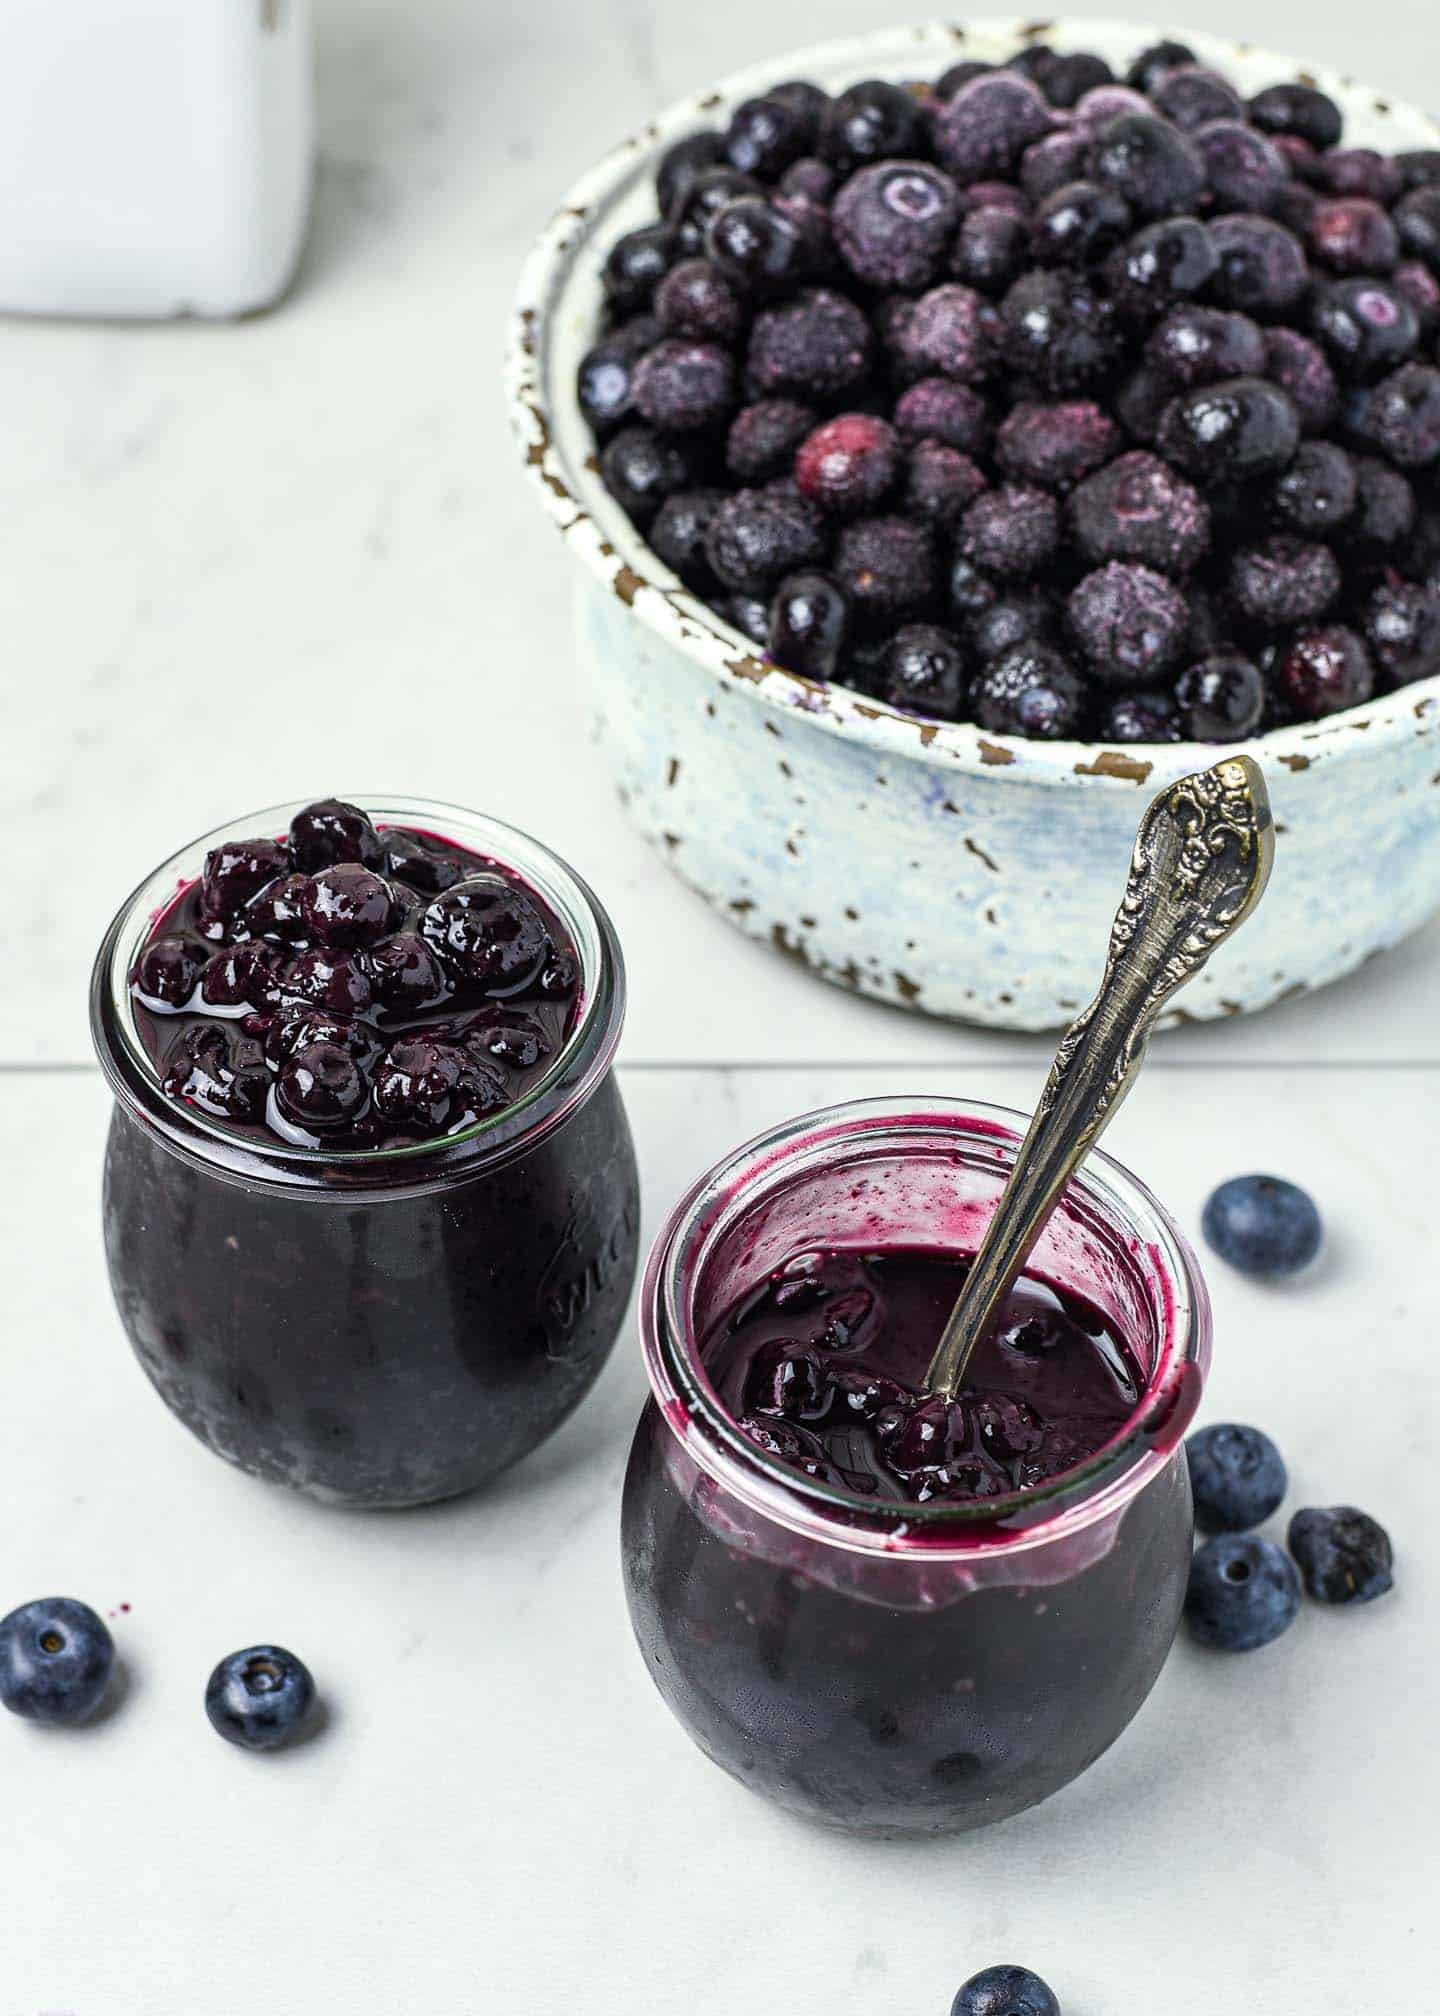 Enjoy this healthy Blueberry Compote on top of pancakes, waffles, fruit, or your favorite frozen dessert. It's so easy! All you need are 4 ingredients and less than 20 minutes to make this amazing blueberry sauce recipe.